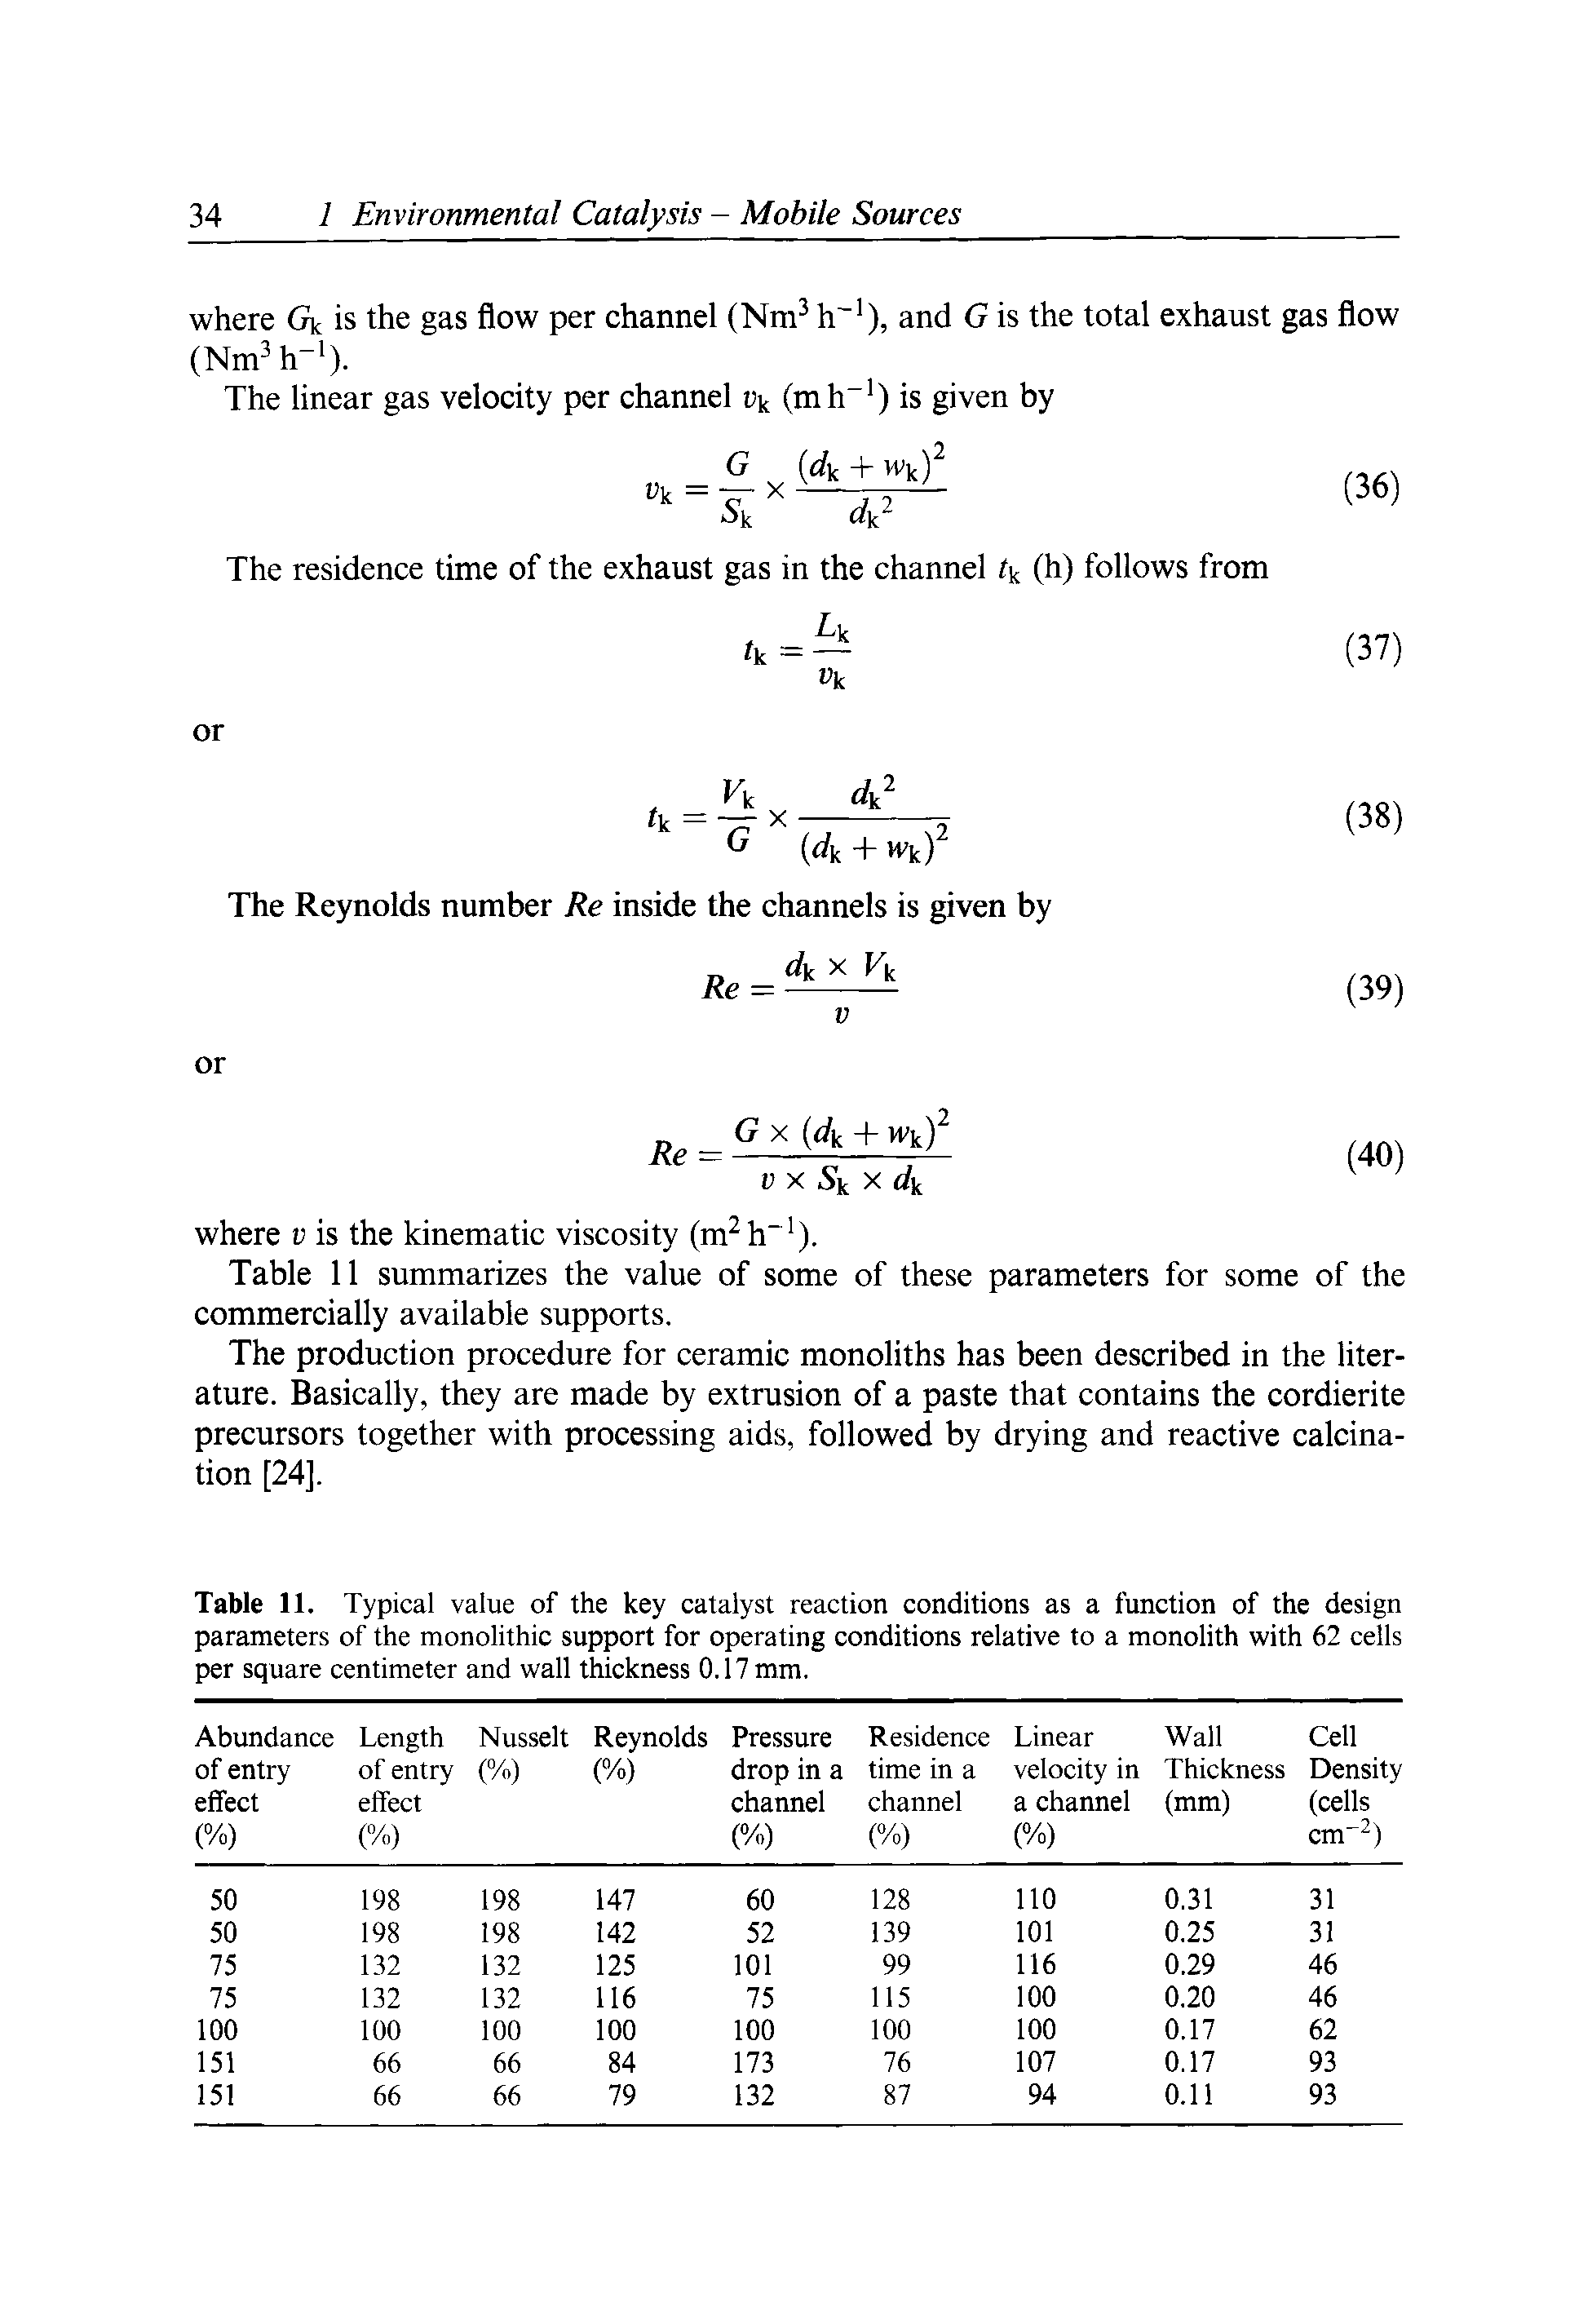 Table 11. Typical value of the key catalyst reaction conditions as a function of the design parameters of the monolithic support for operating conditions relative to a monolith with 62 cells per square centimeter and wall thickness 0.17 mm.